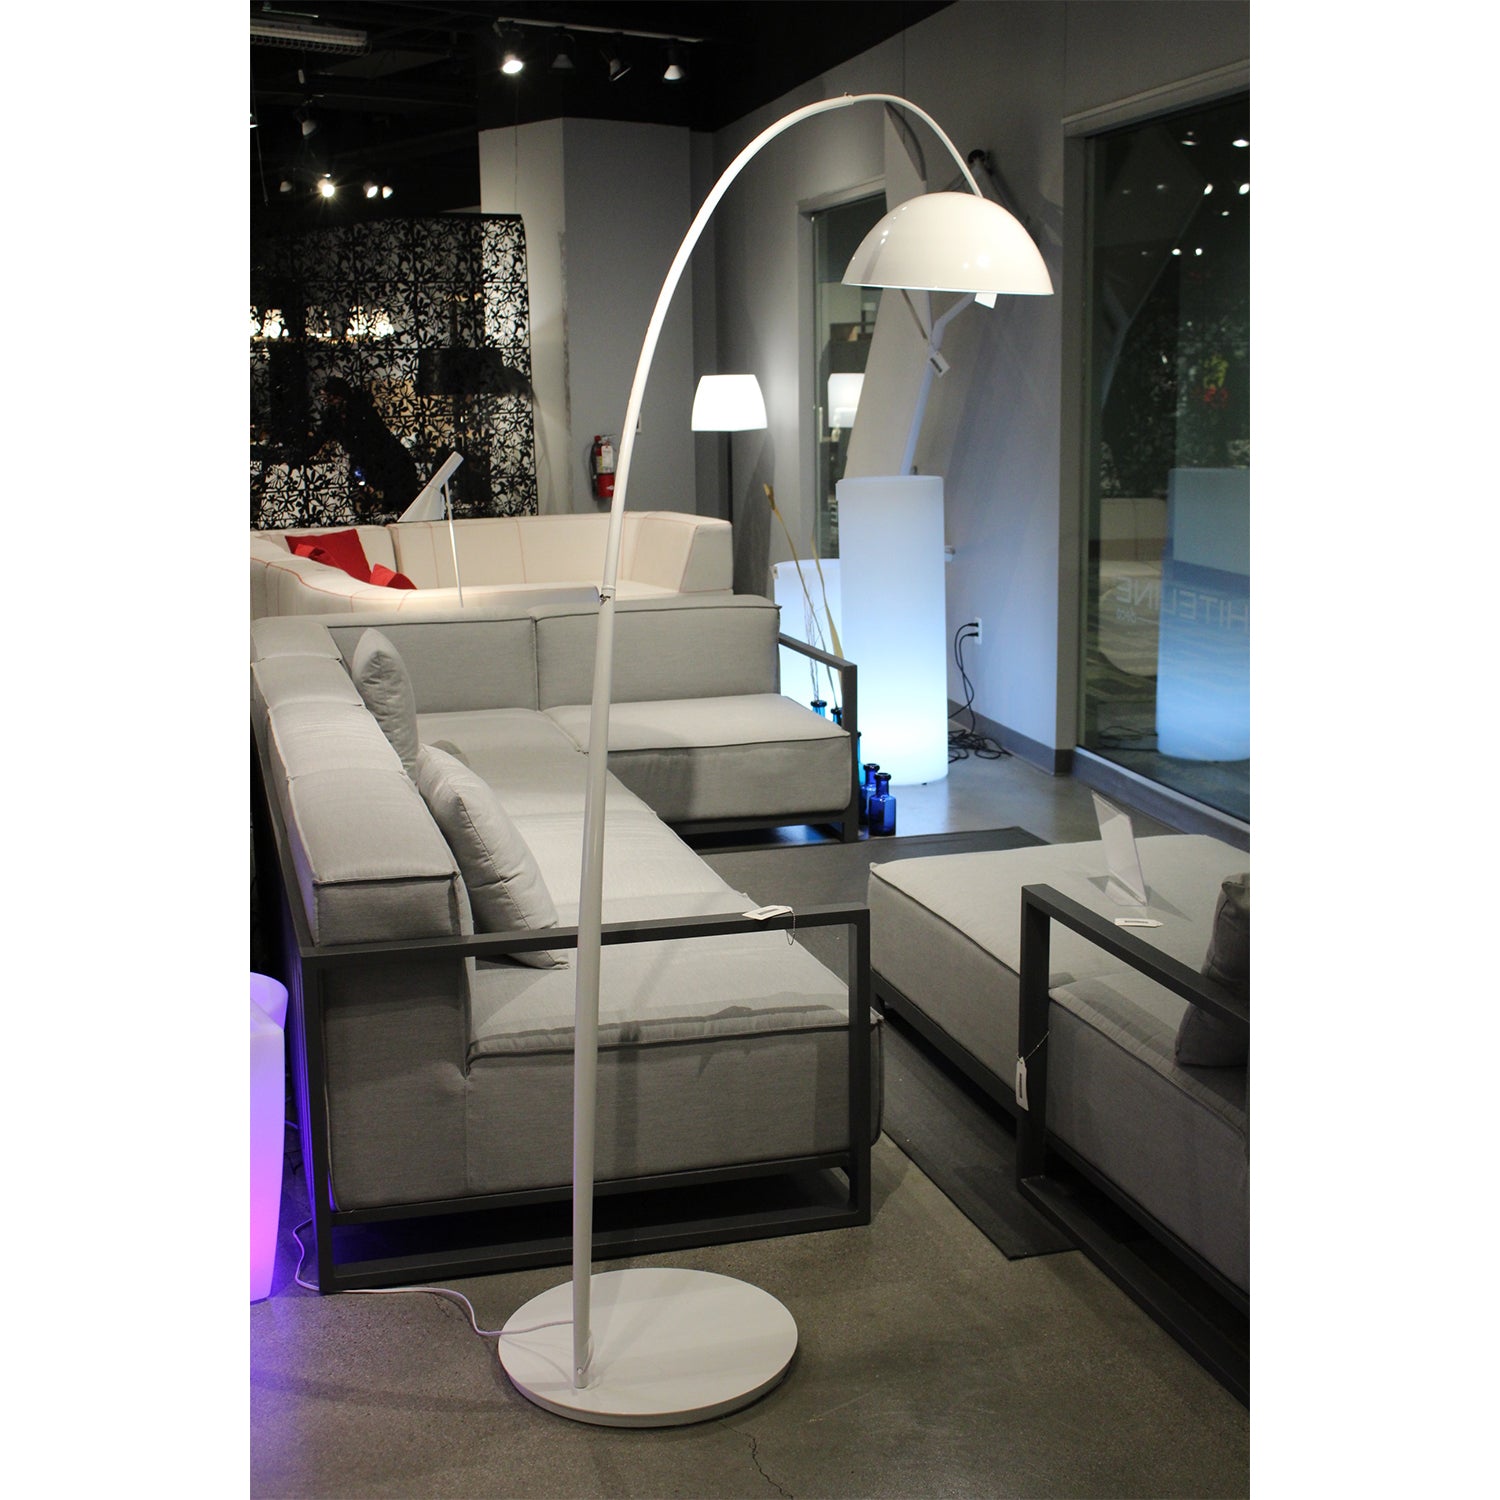 91" White Steel Arched Floor Lamp